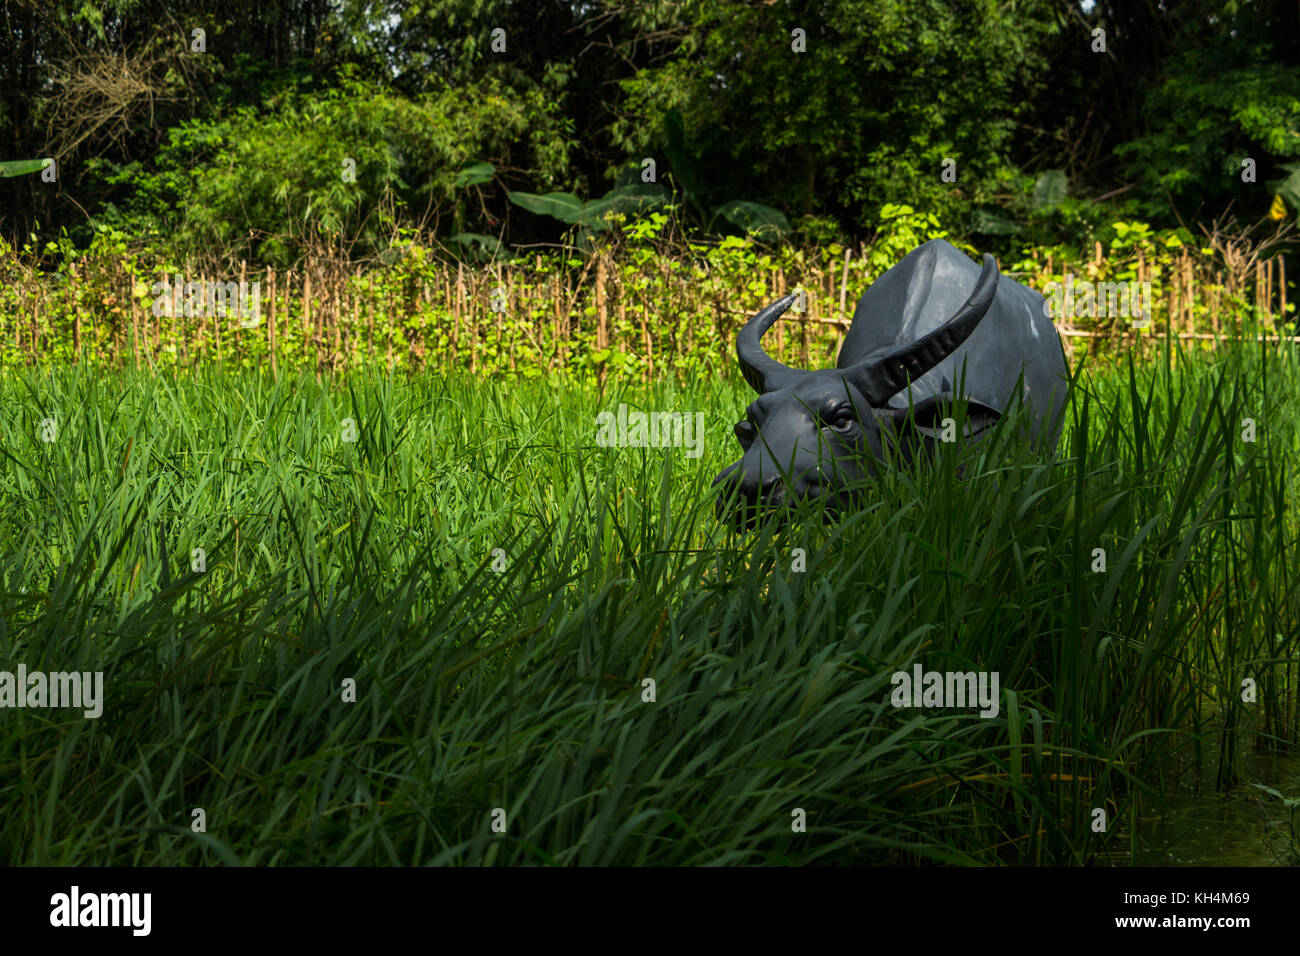 Bull statue in a rice paddy field in Vietnam Stock Photo